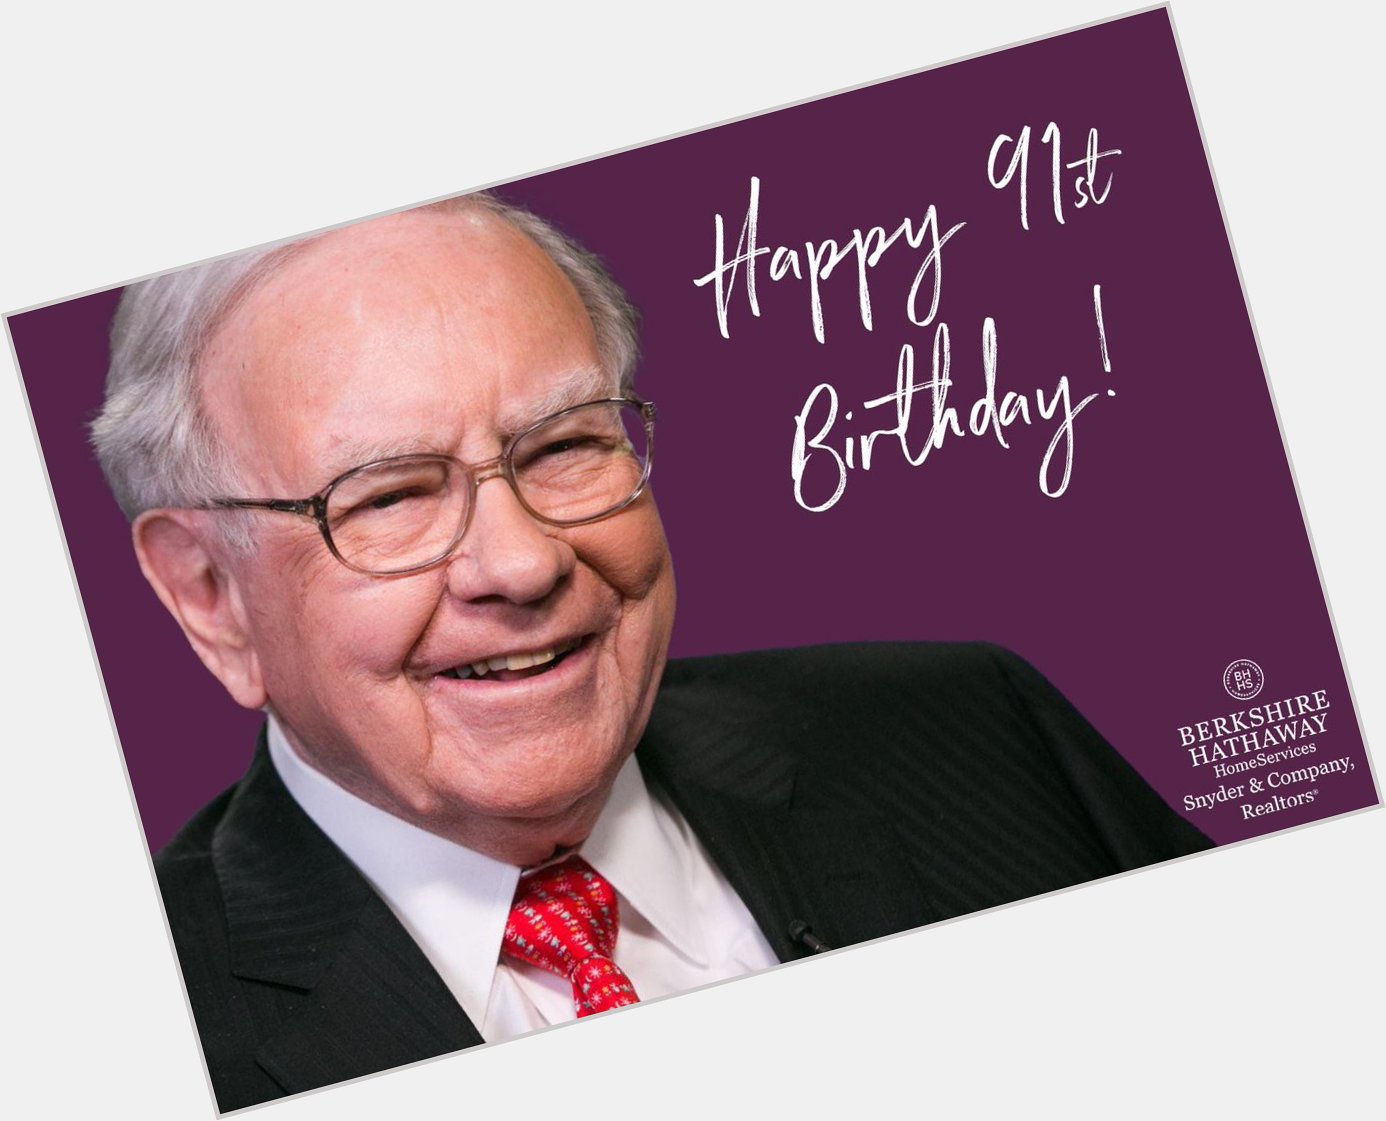 Happy 91st birthday to the one and only Warren Buffett!  